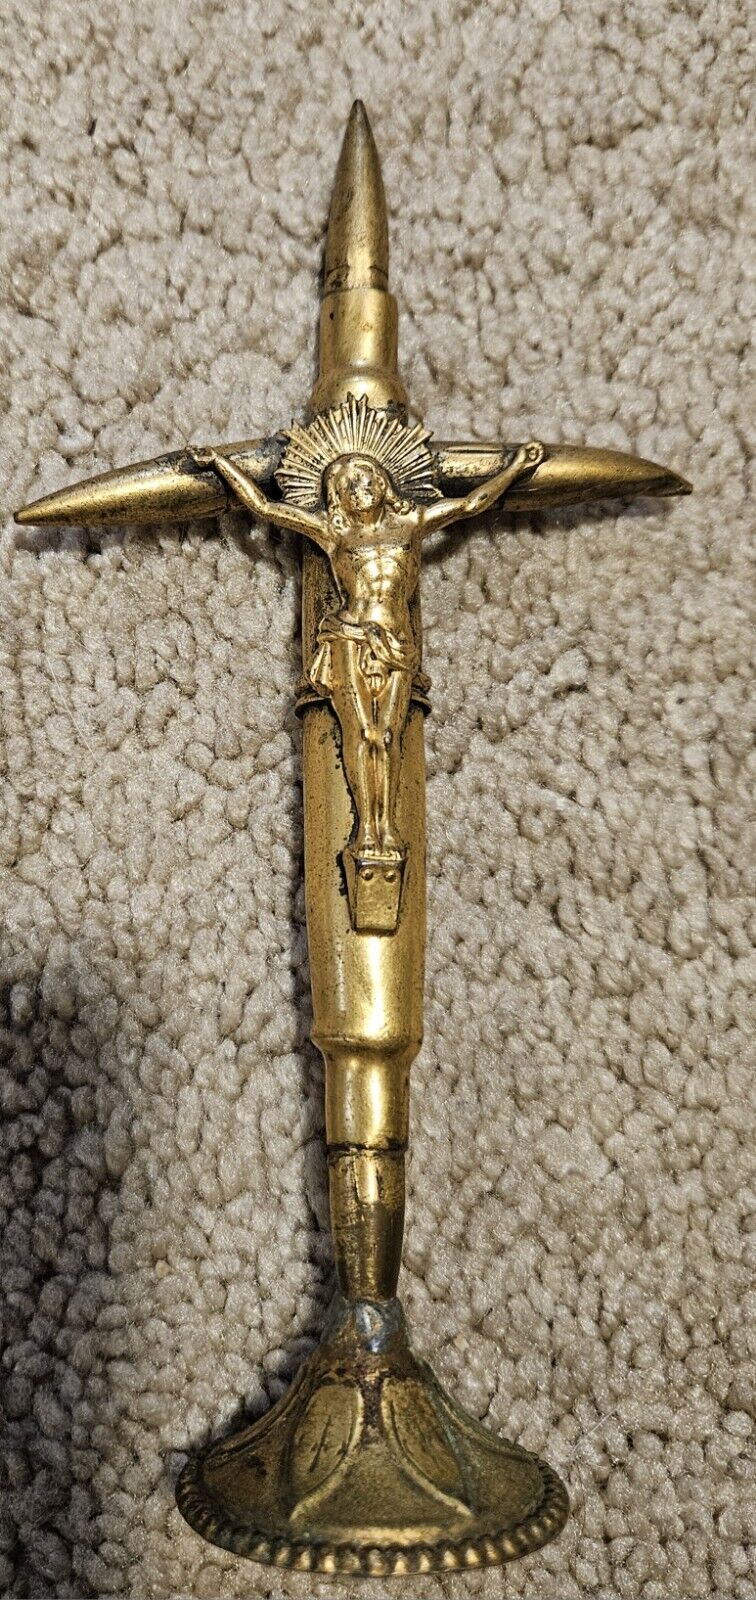 WWI/WWII Trench Art. Religious Word War Cross Bullet Trench art.